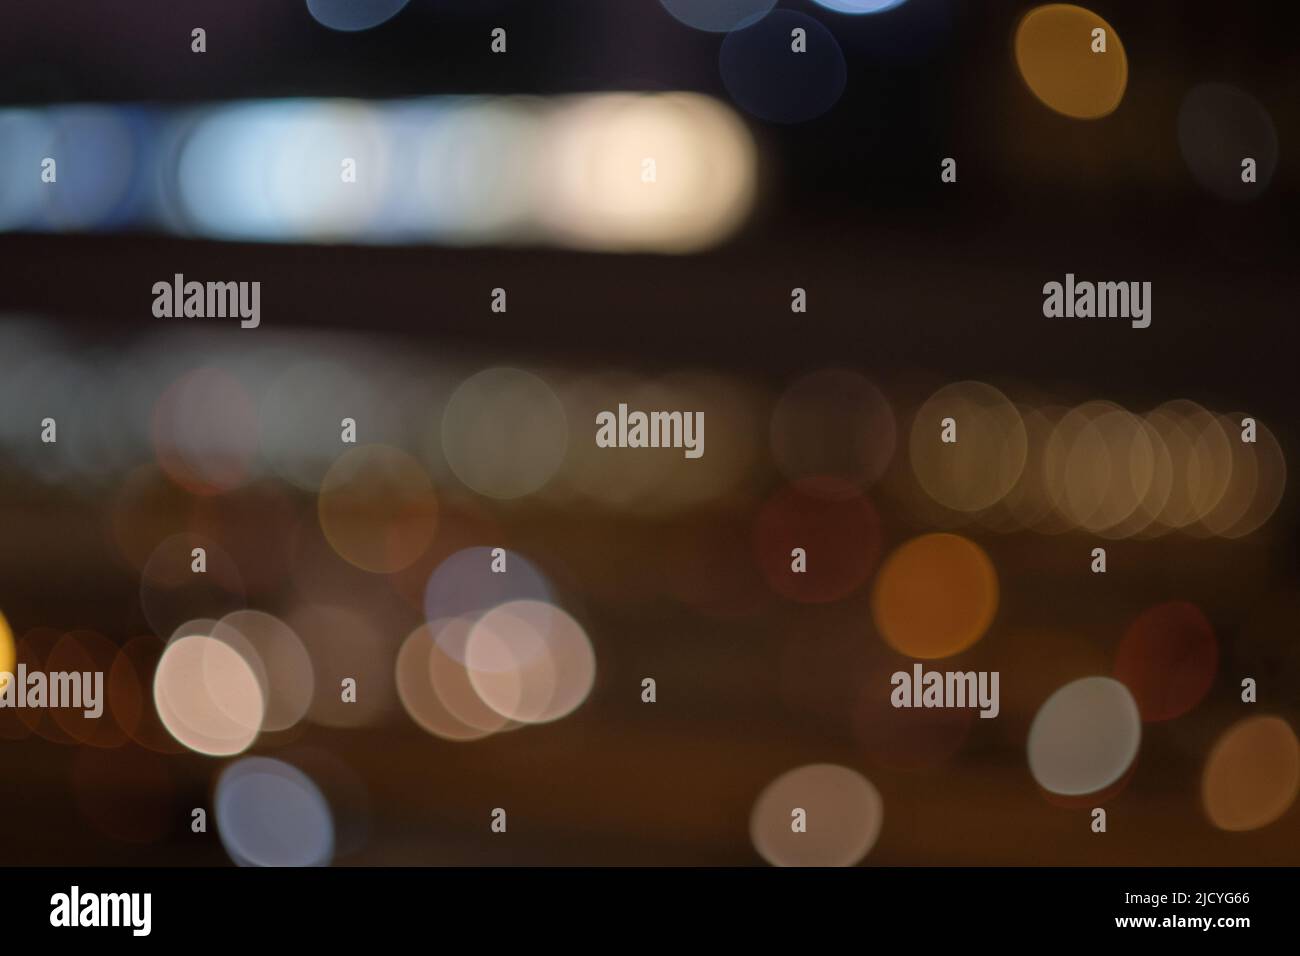 Blurry city lights at night for a dreamy aesthetic. Abstract conceptual shot of getting lost in thought or losing perspective. Horizontal copy space. Stock Photo